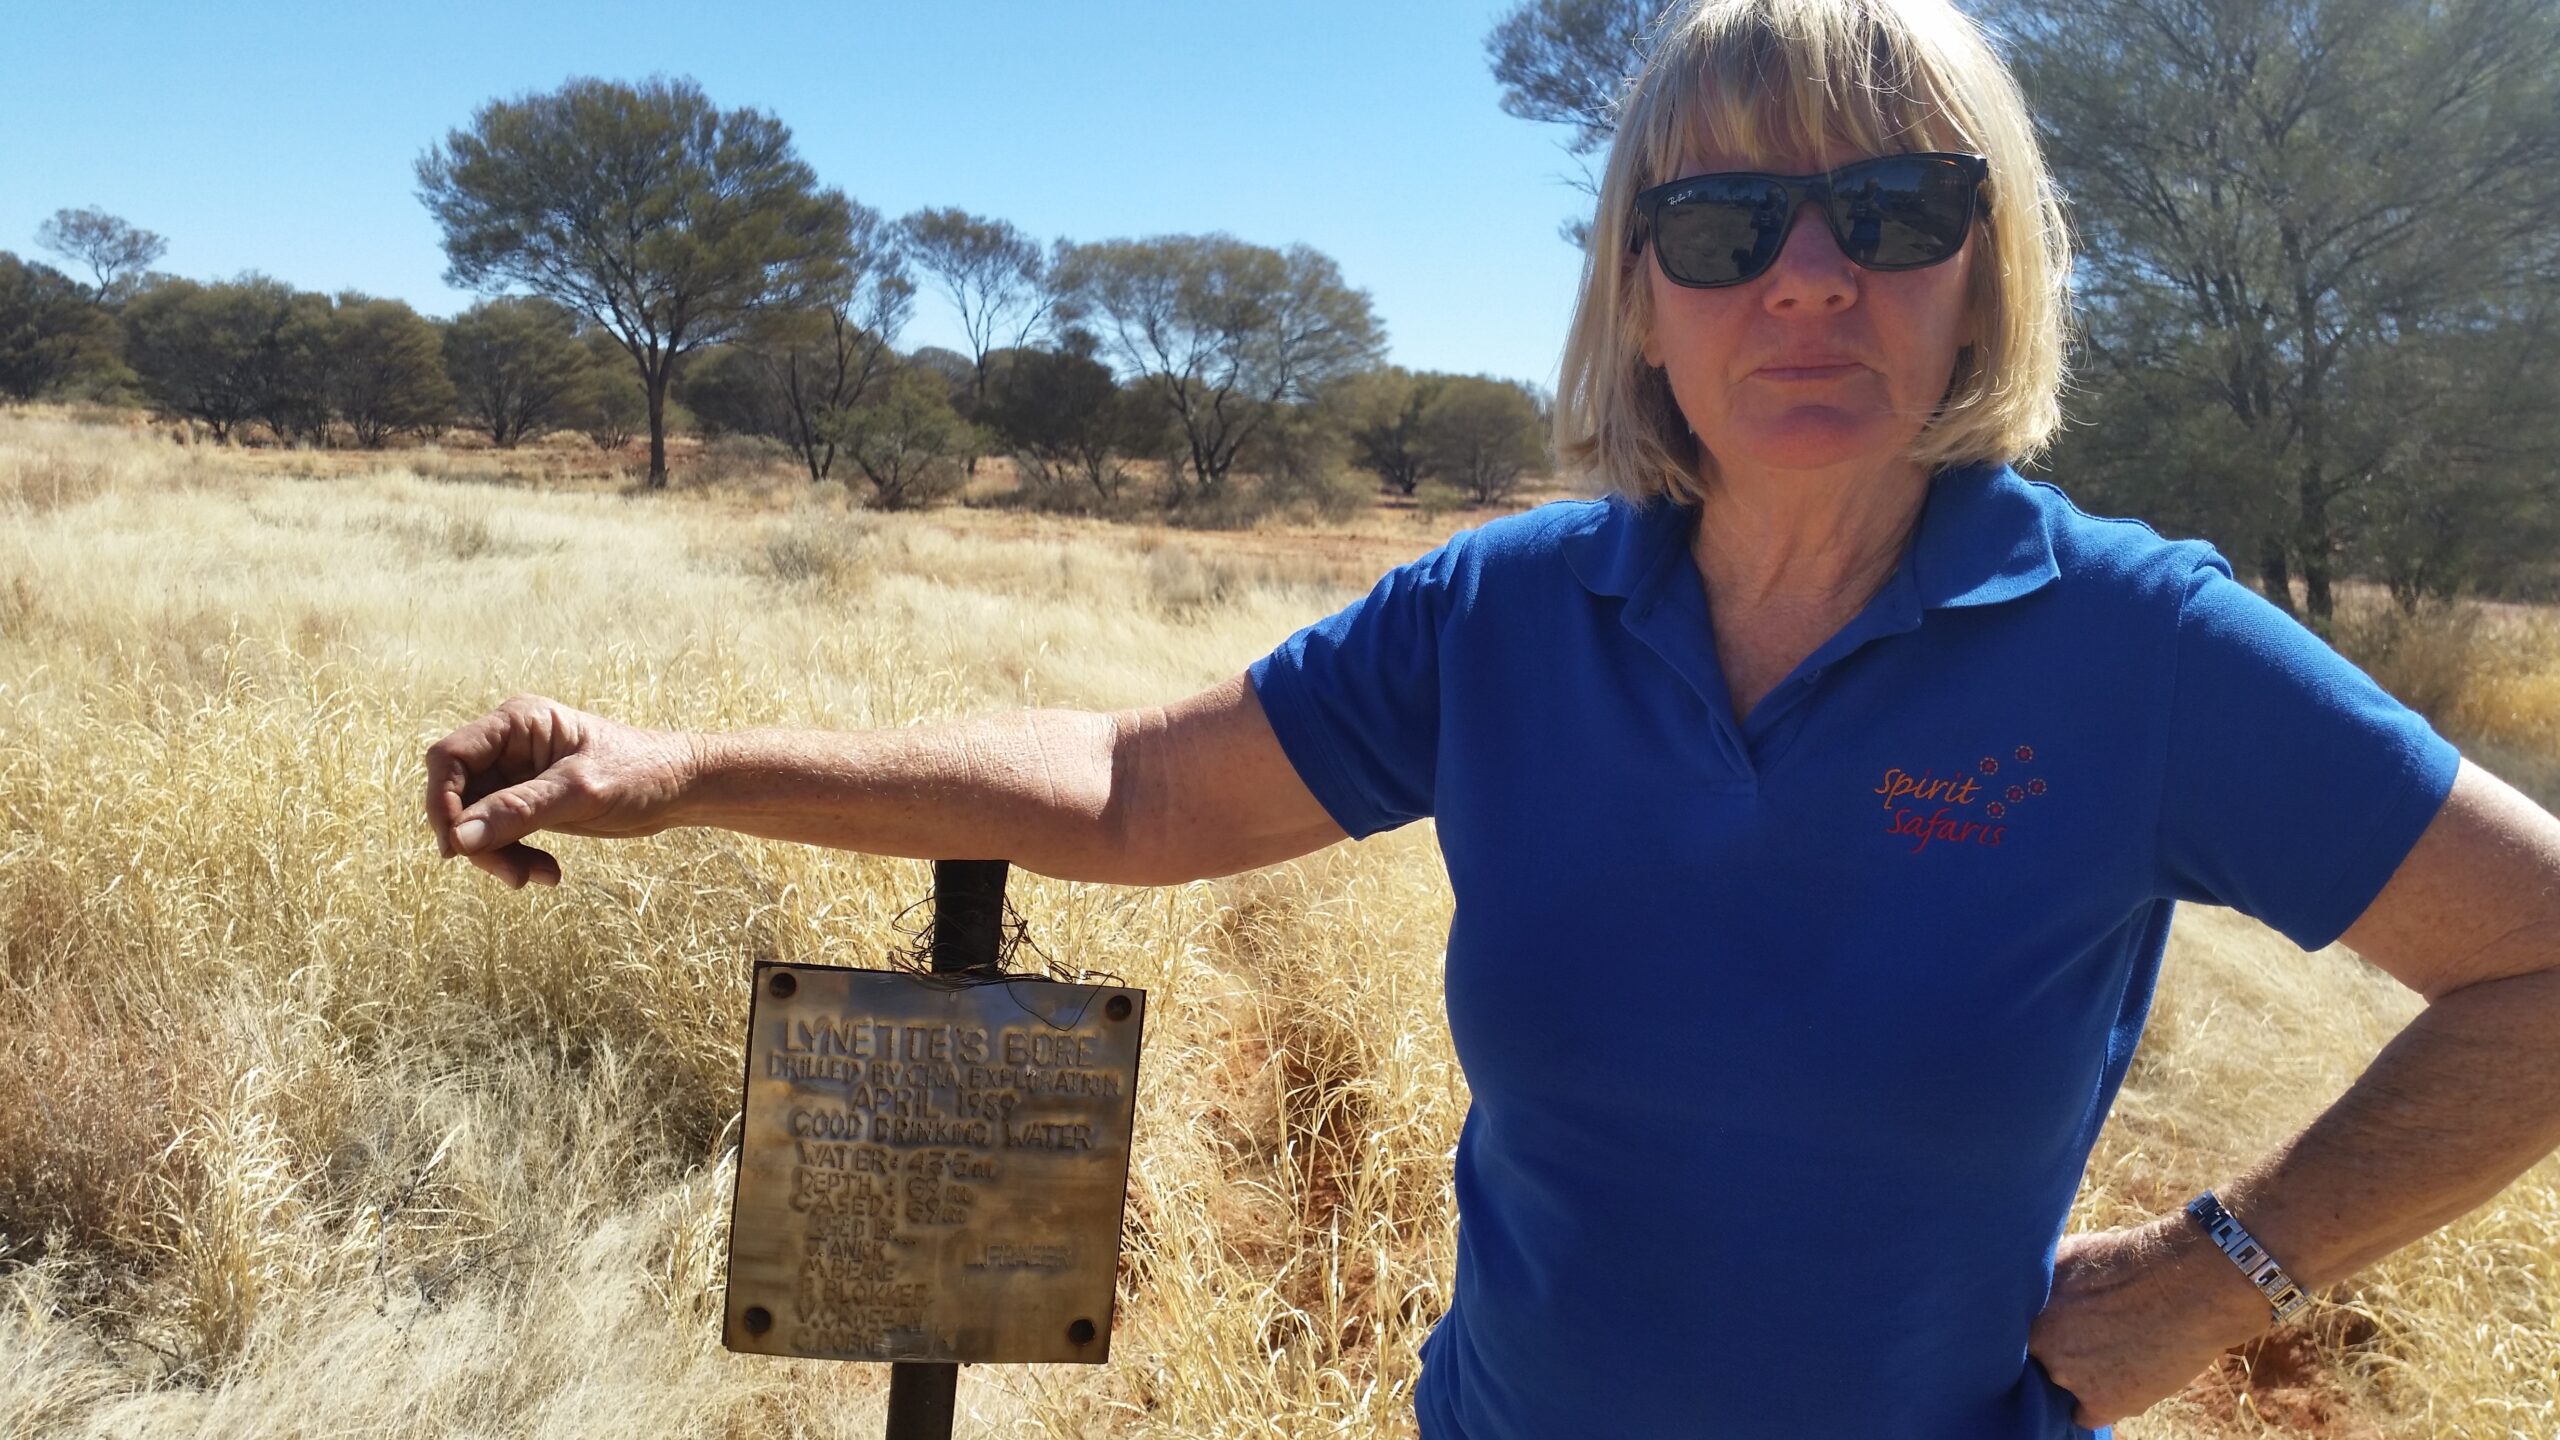 Canning Stock Route Tour from Alice Springs to Alice Springs via Gunbarrel Highway & Tanami Track 19 days